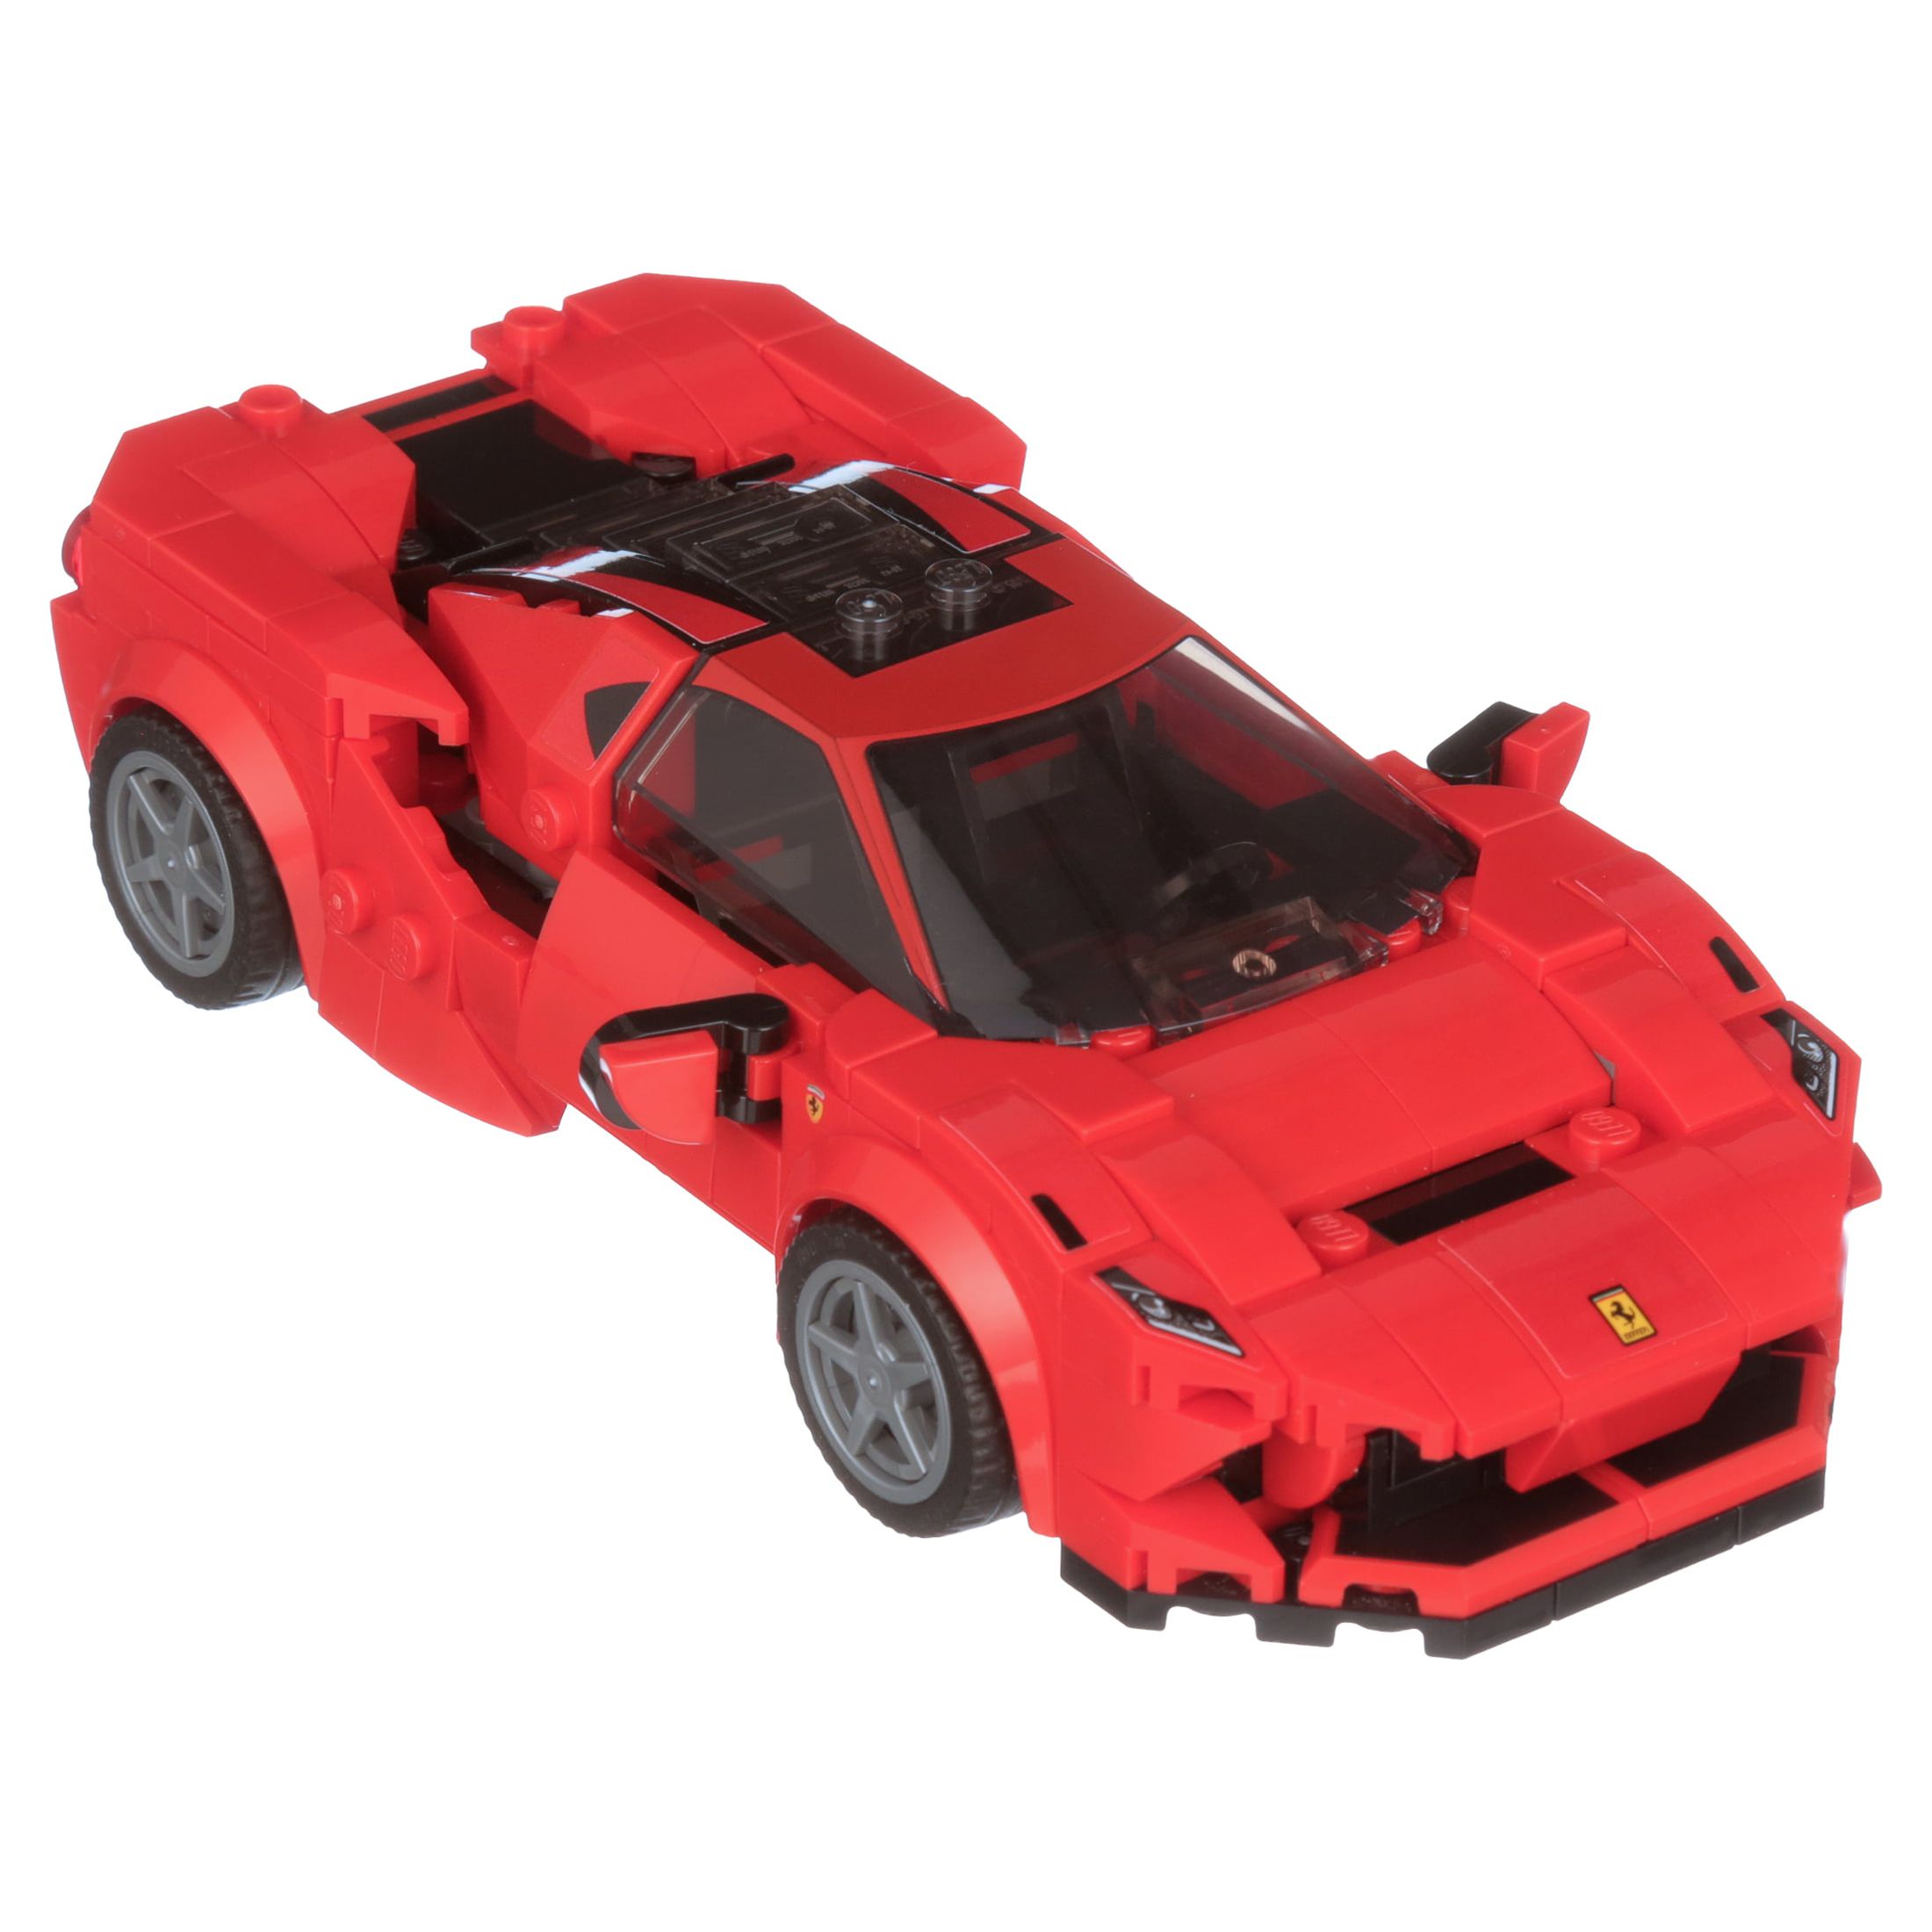 LEGO Speed Champions 76895 Ferrari F8 Tributo Racing Model Car, Vehicle Building Car (275 pieces) - image 10 of 12